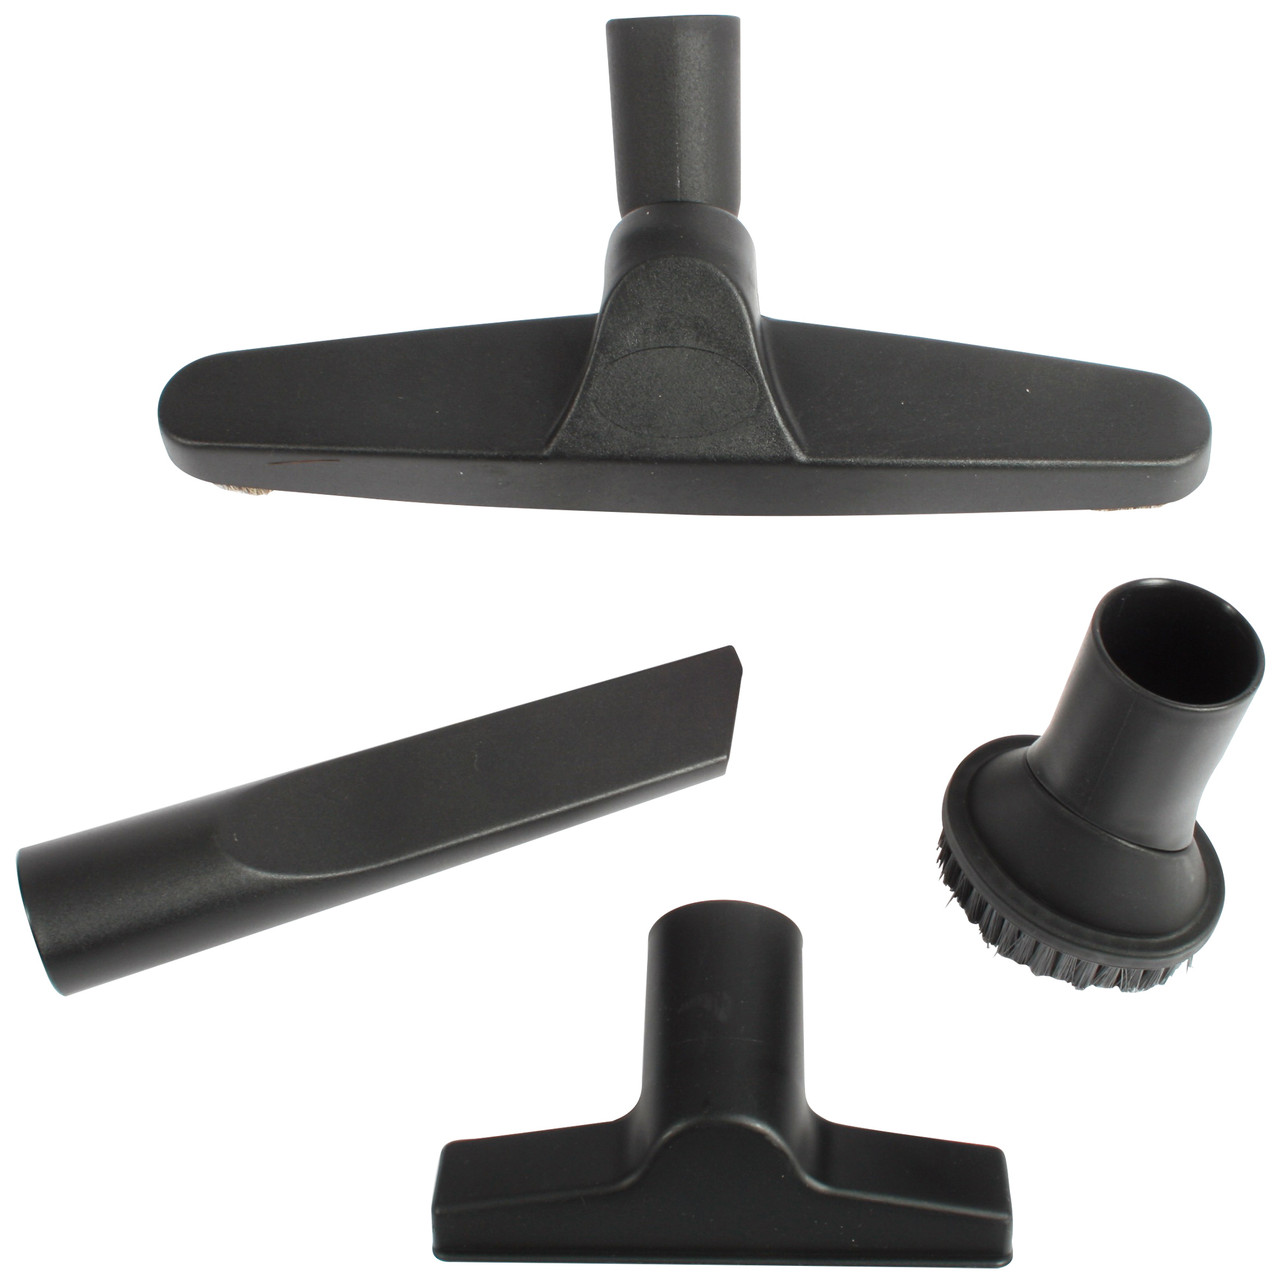 Cen-Tec Systems 95391 Attachment Set with Extension Wands for 35mm Diameter Miele and Sebo Vacuums, W, Black